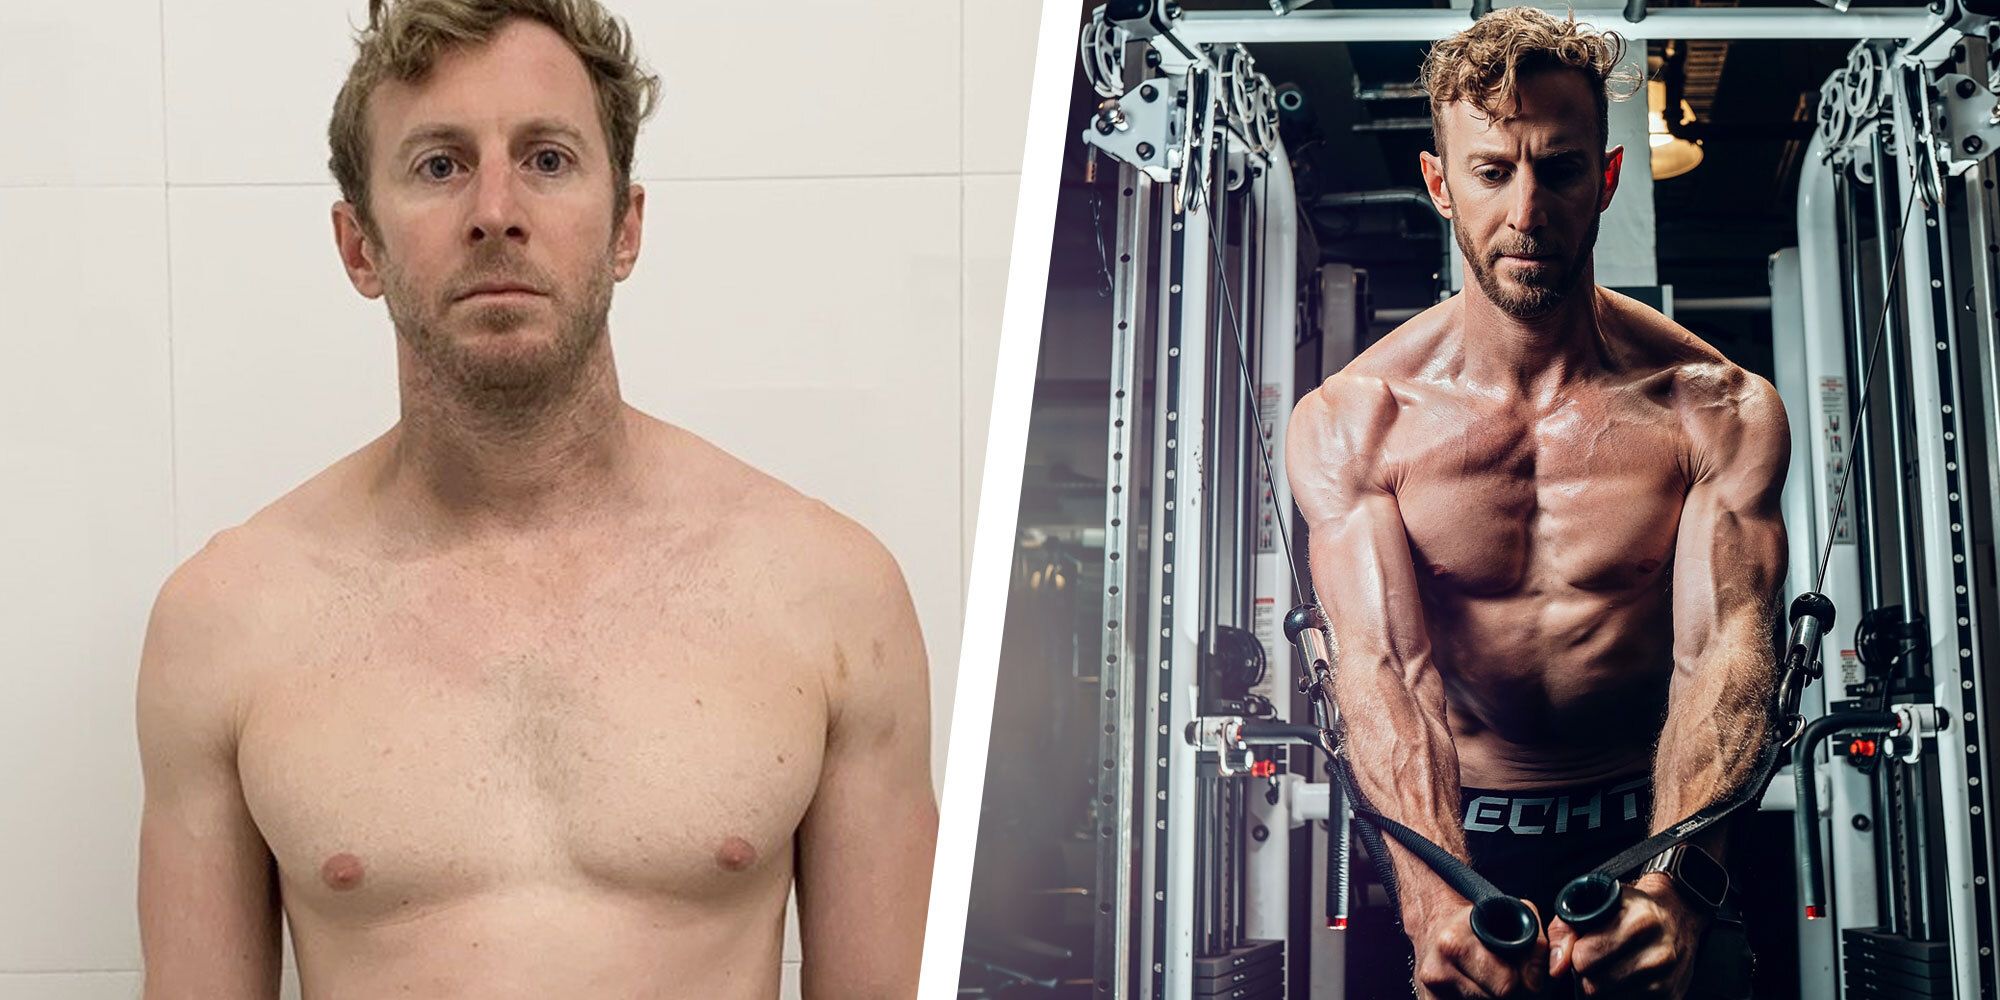 This Guy Got Cut in 12 Weeks With More Meals, Fewer Calories